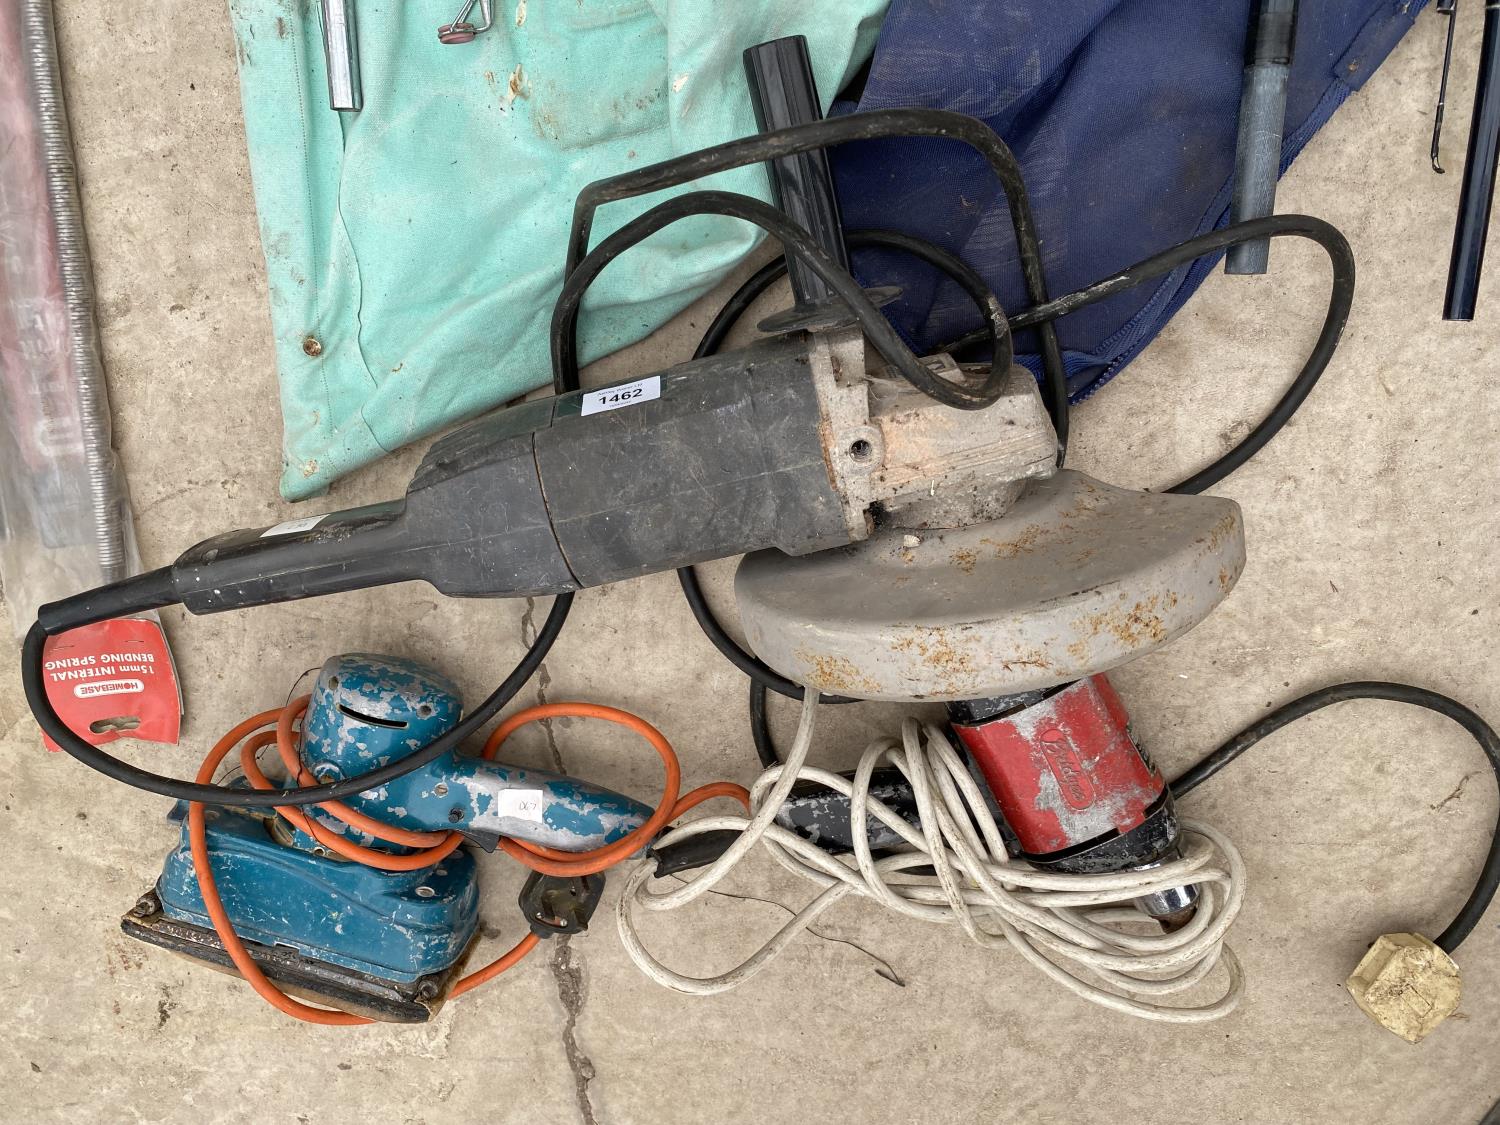 AN ASSORTMENT OF ITEMS TO INCLUDE A BLACK AND DECKER GRINDER AND AN ELECTRIC SANDER ETC